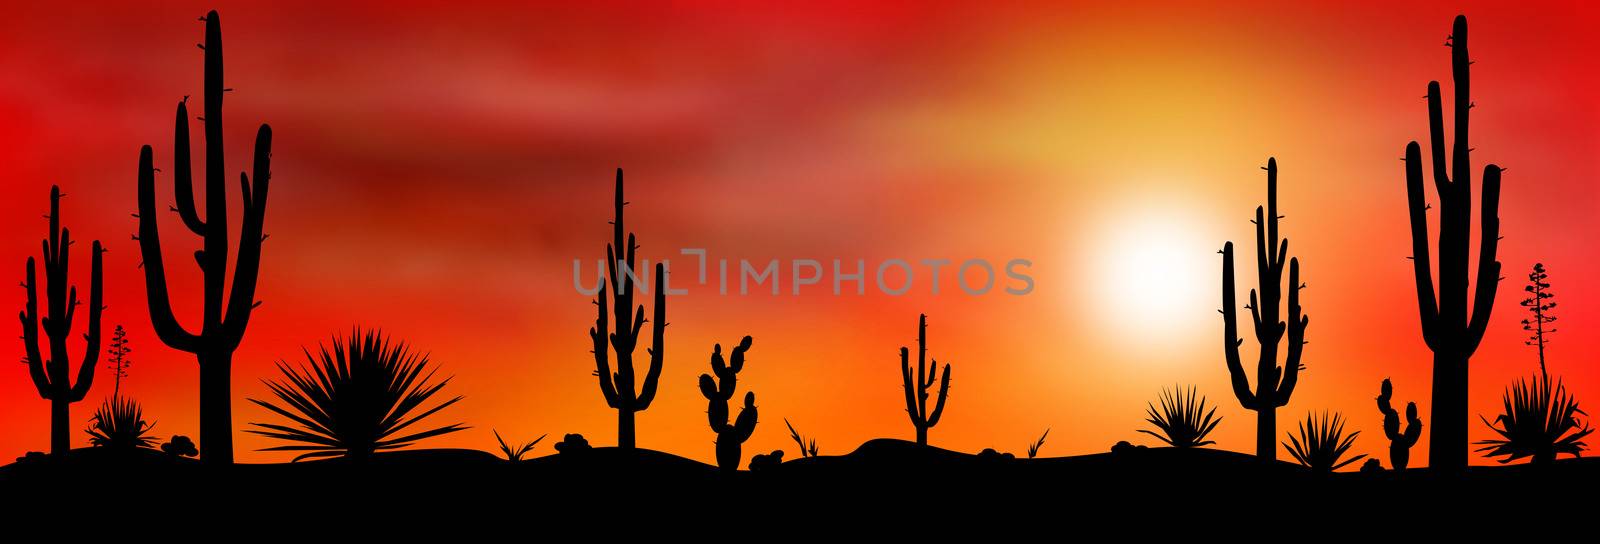 Sunset in the Mexican desert. Silhouettes of stones, cacti and plants. Desert landscape with cacti. The stony desert.                                                                                                                                                                          